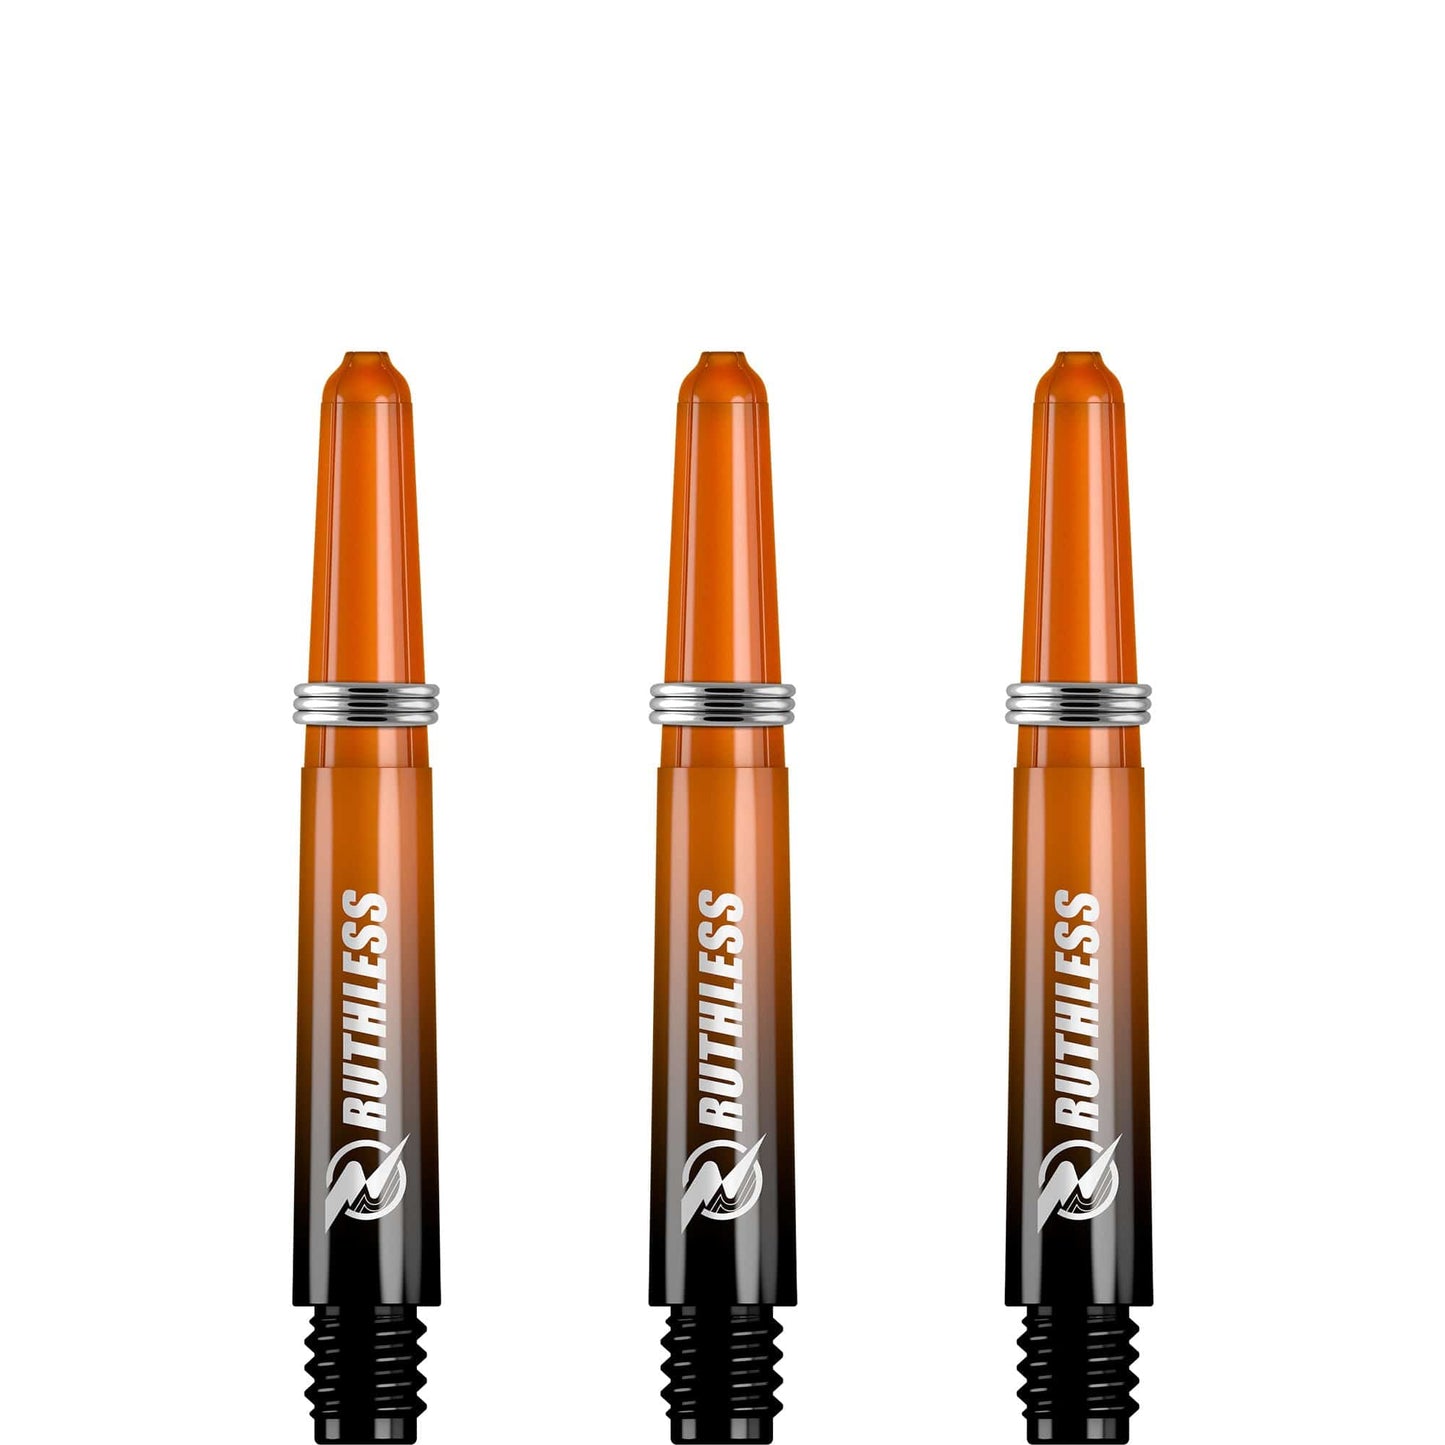 Ruthless Deflectagrip Plus Dart Shafts - Polycarbonate Stems with Springs - Orange Short